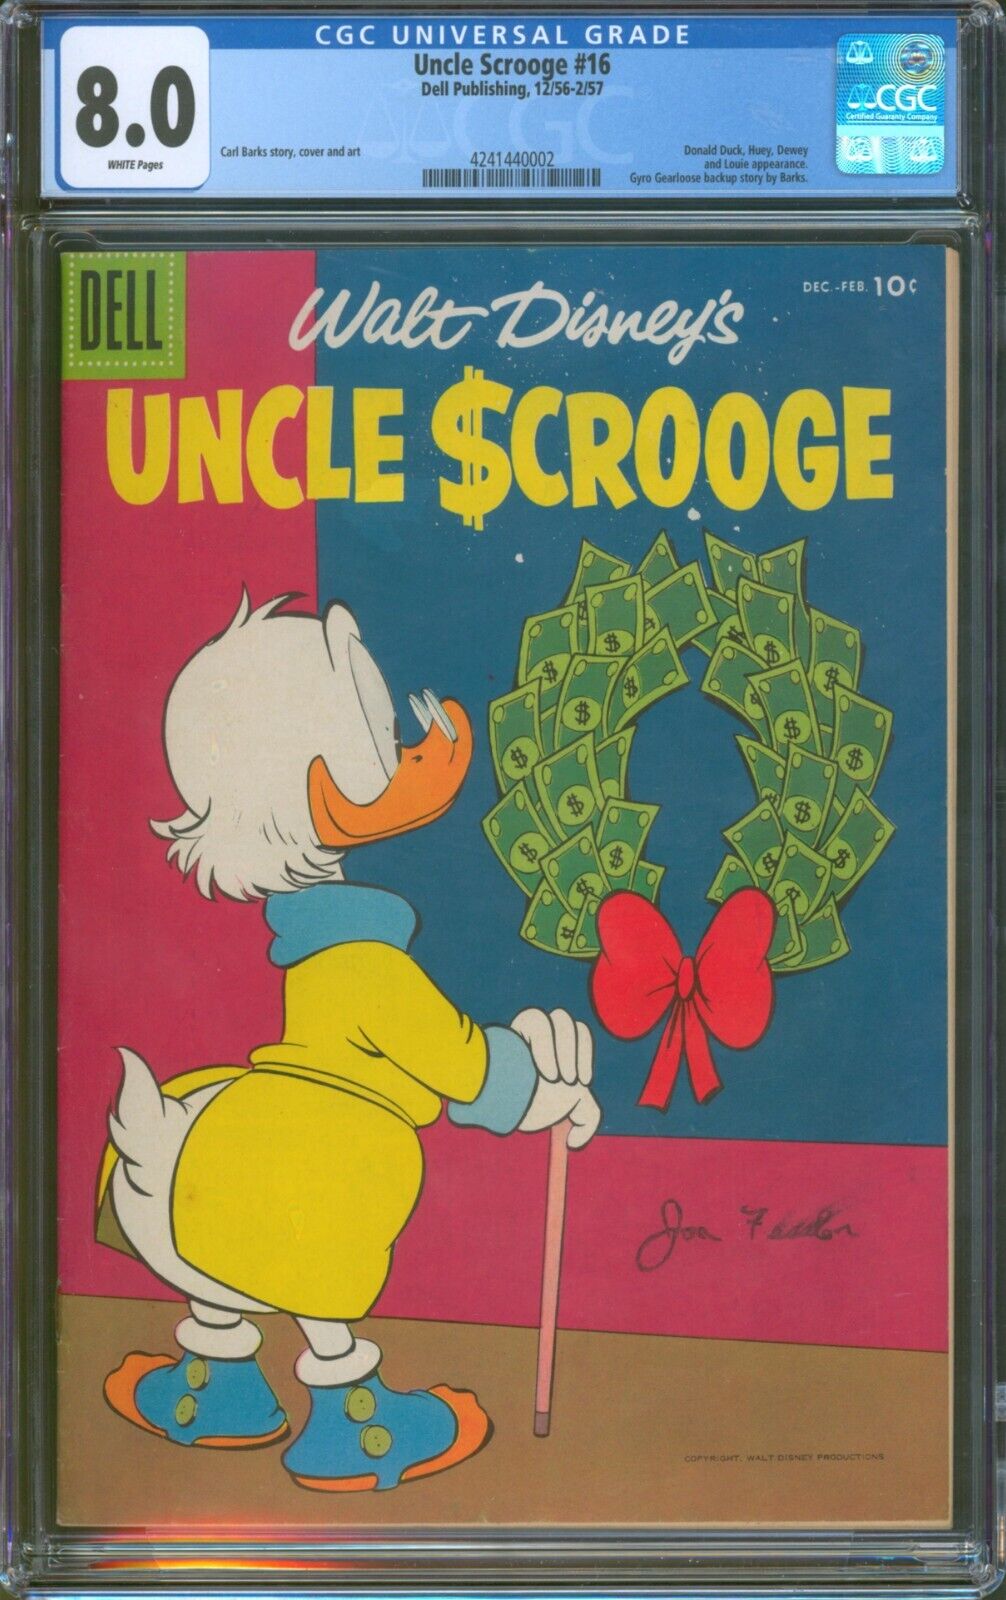 Uncle Scrooge #16 (Dell 1956) ⭐ CGC 8.0 ⭐ Carl Barks Silver Age Disney Comic